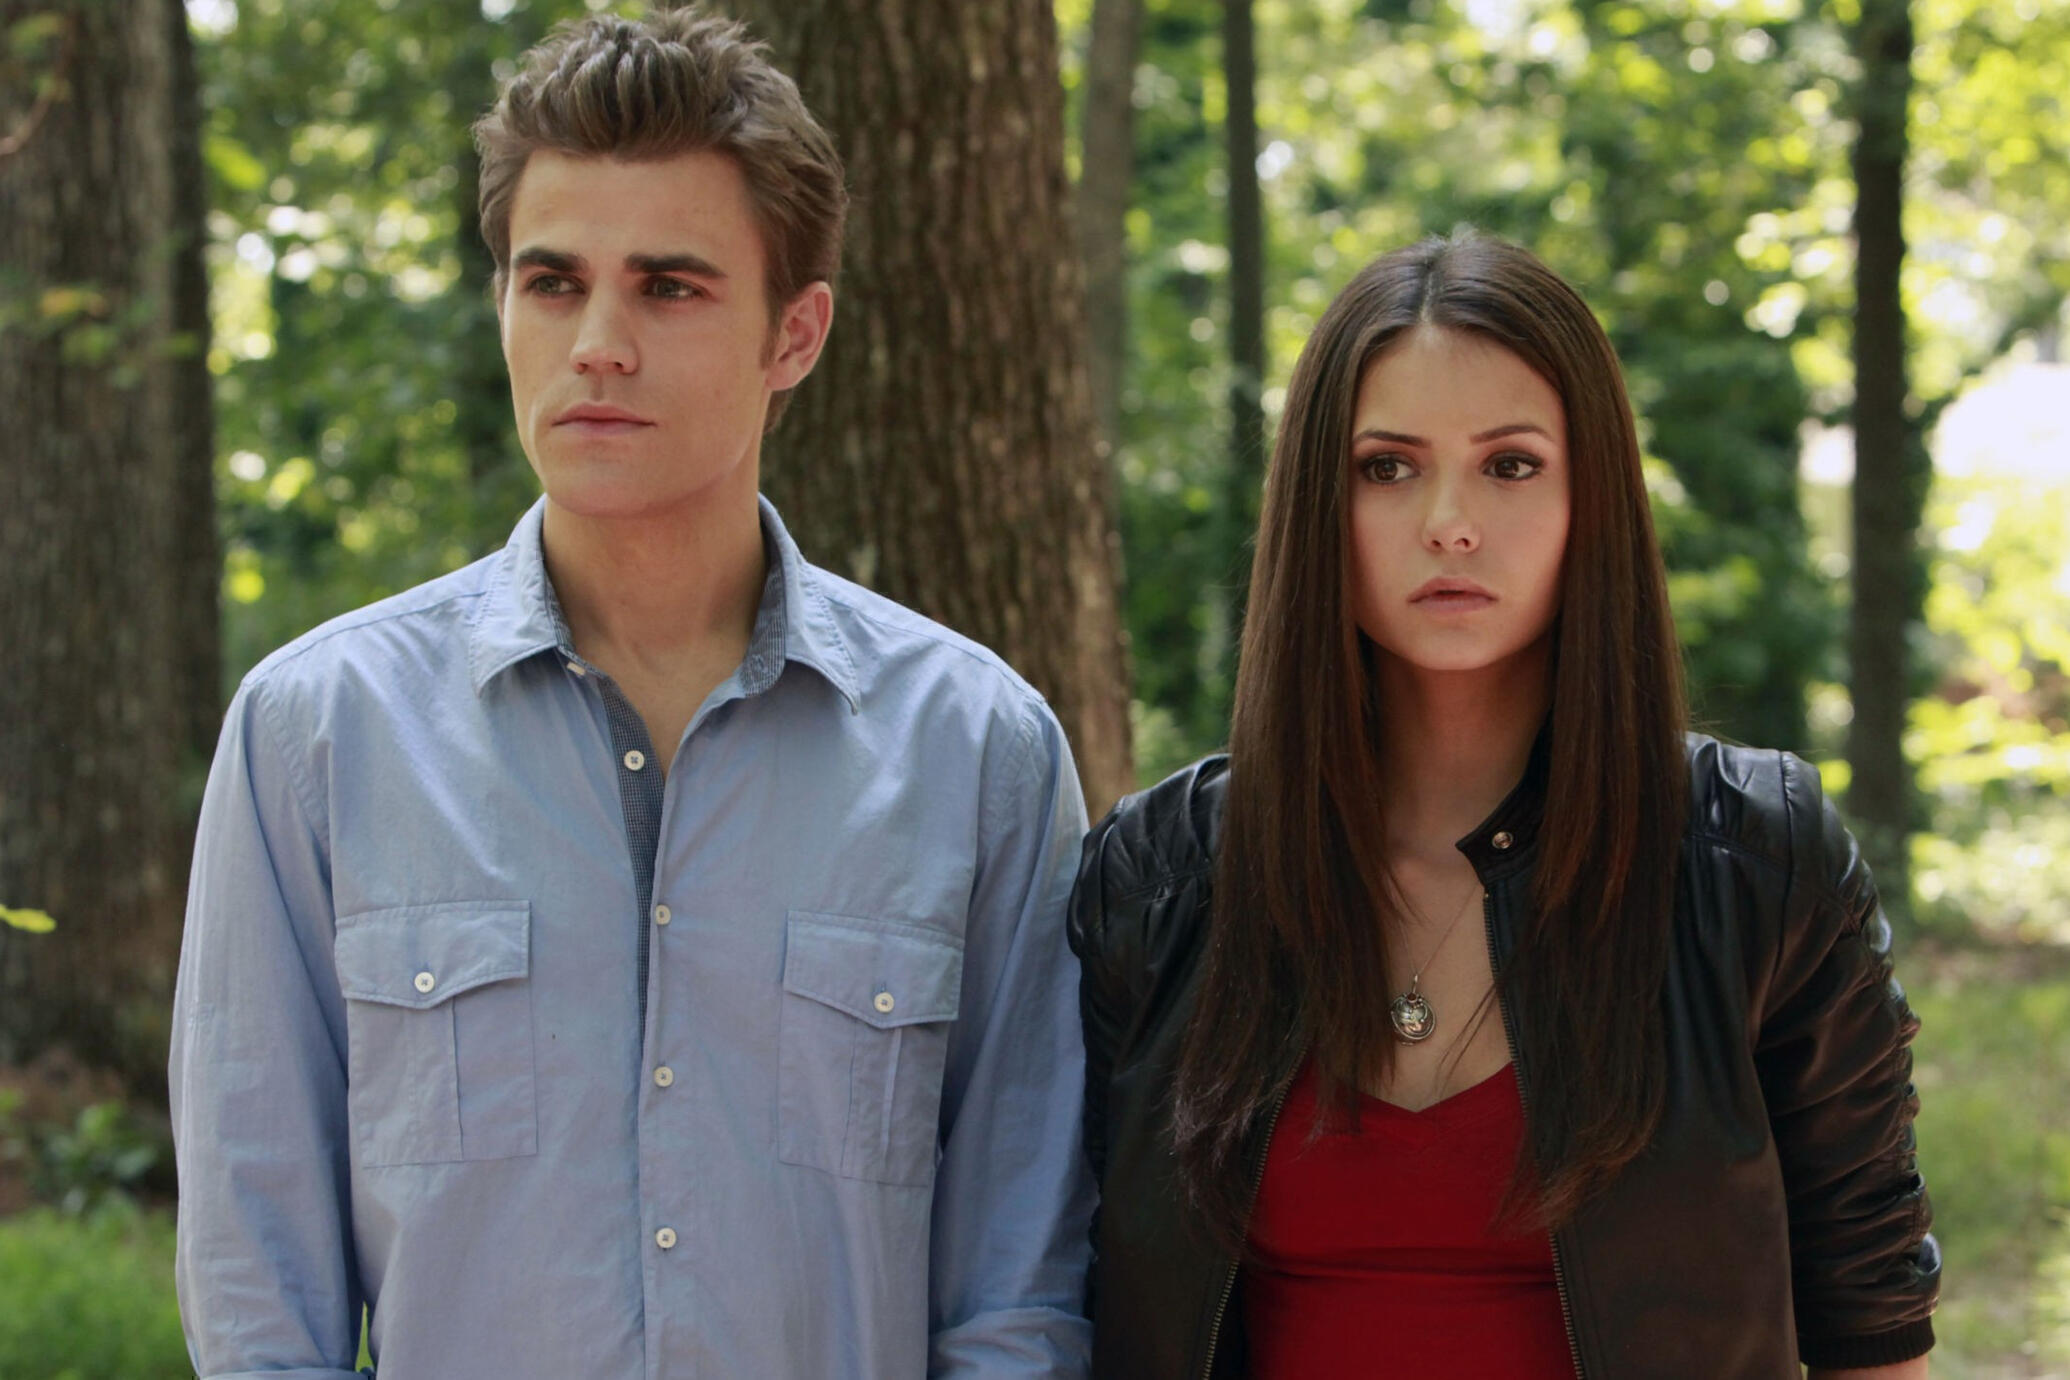 The Vampire Diaries Cast on Shooting the Pilot 10 Years Ago - TV Guide